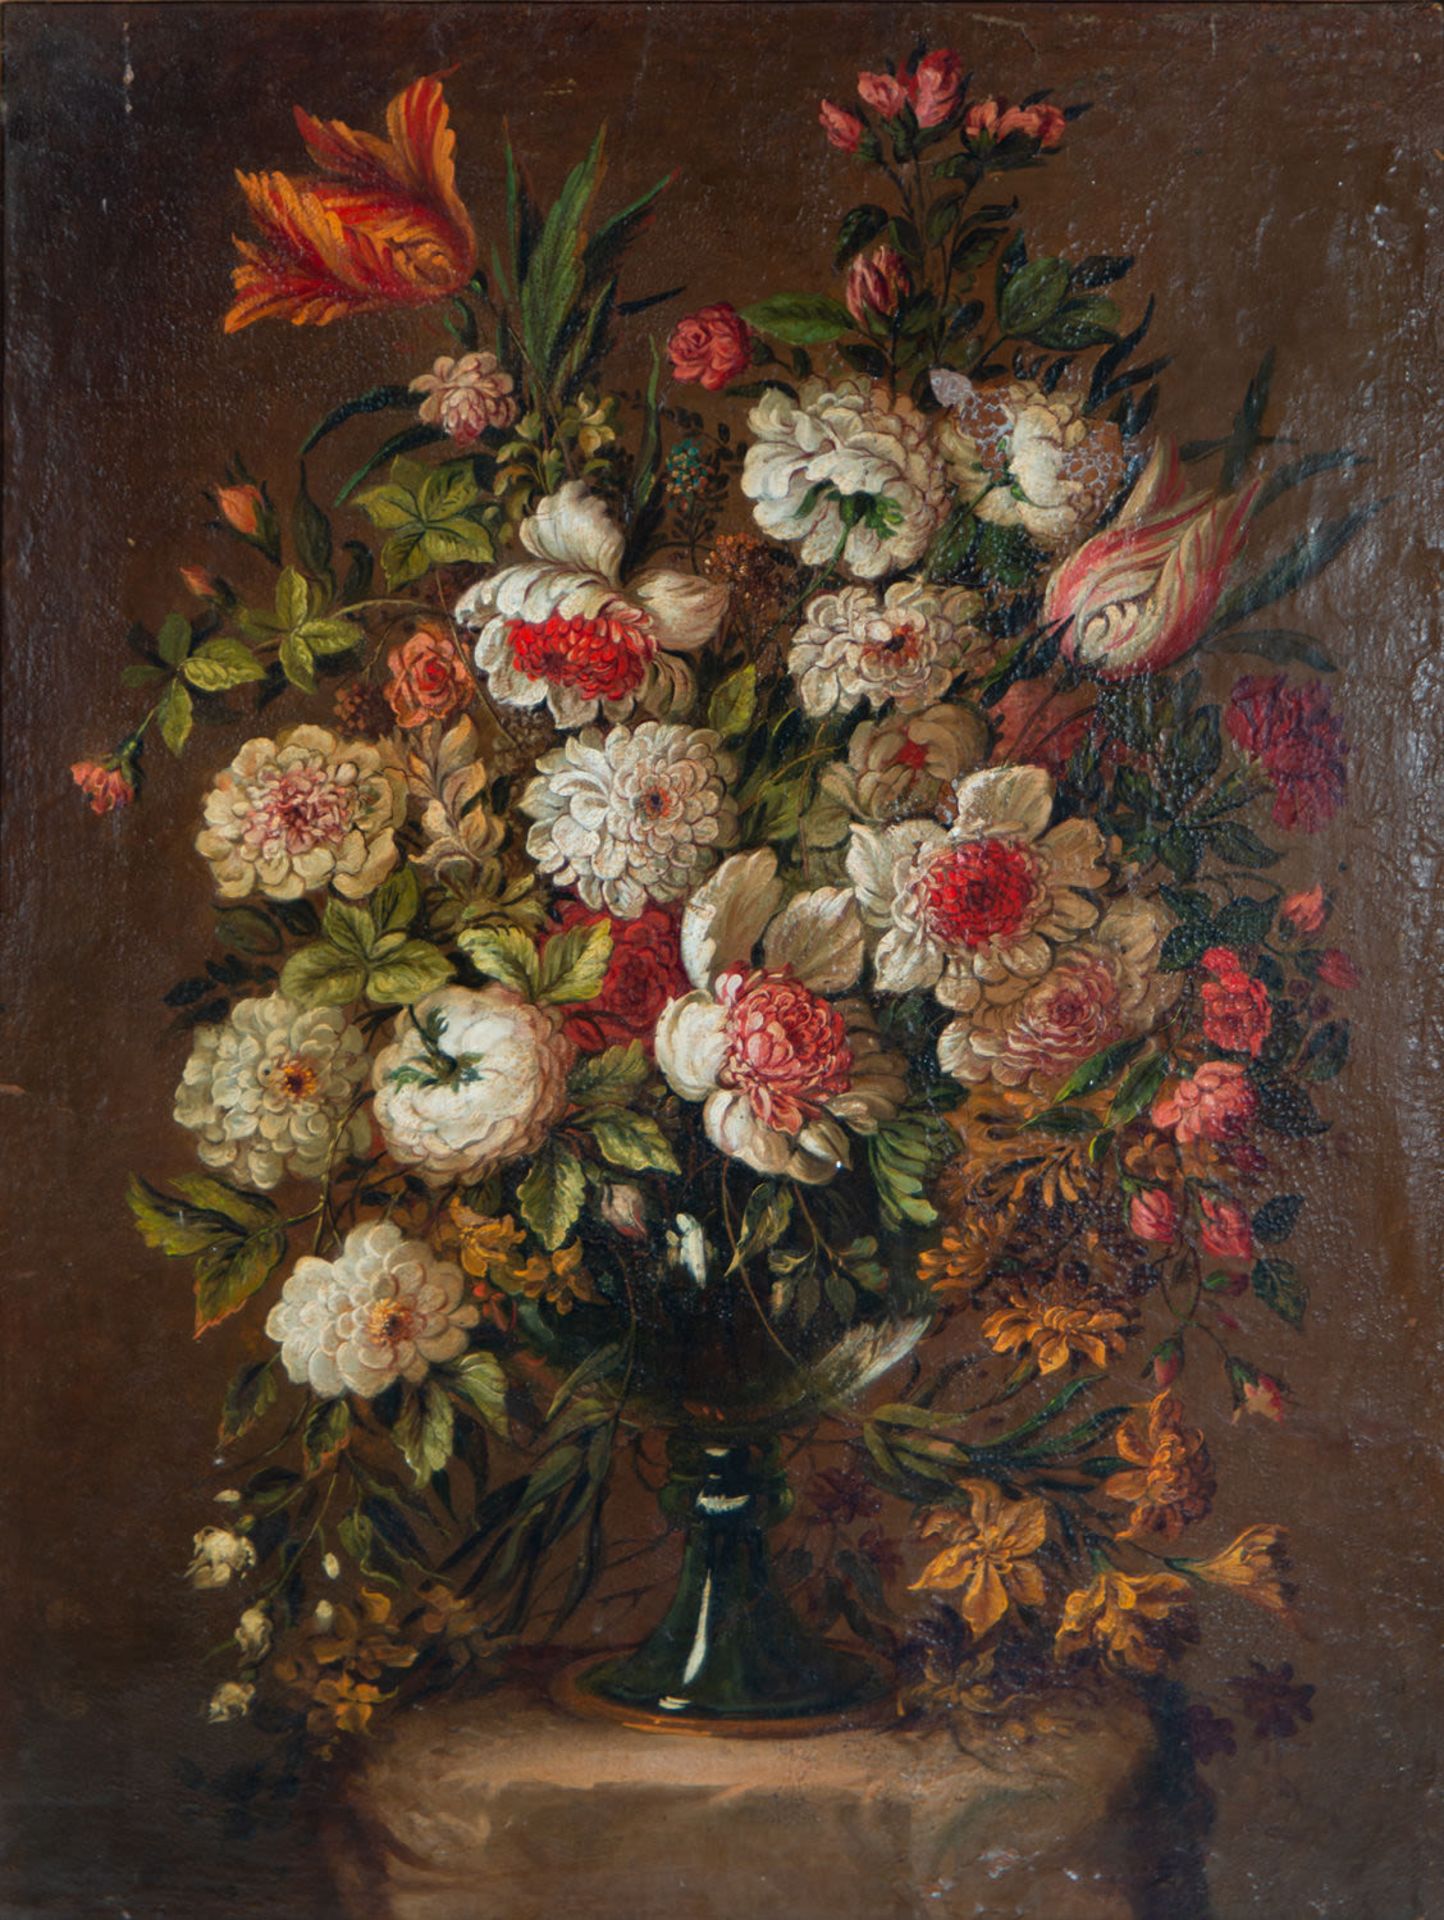 Pair of large still lifes of Flowers, Dutch school of the 17th - 18th century - Image 13 of 20